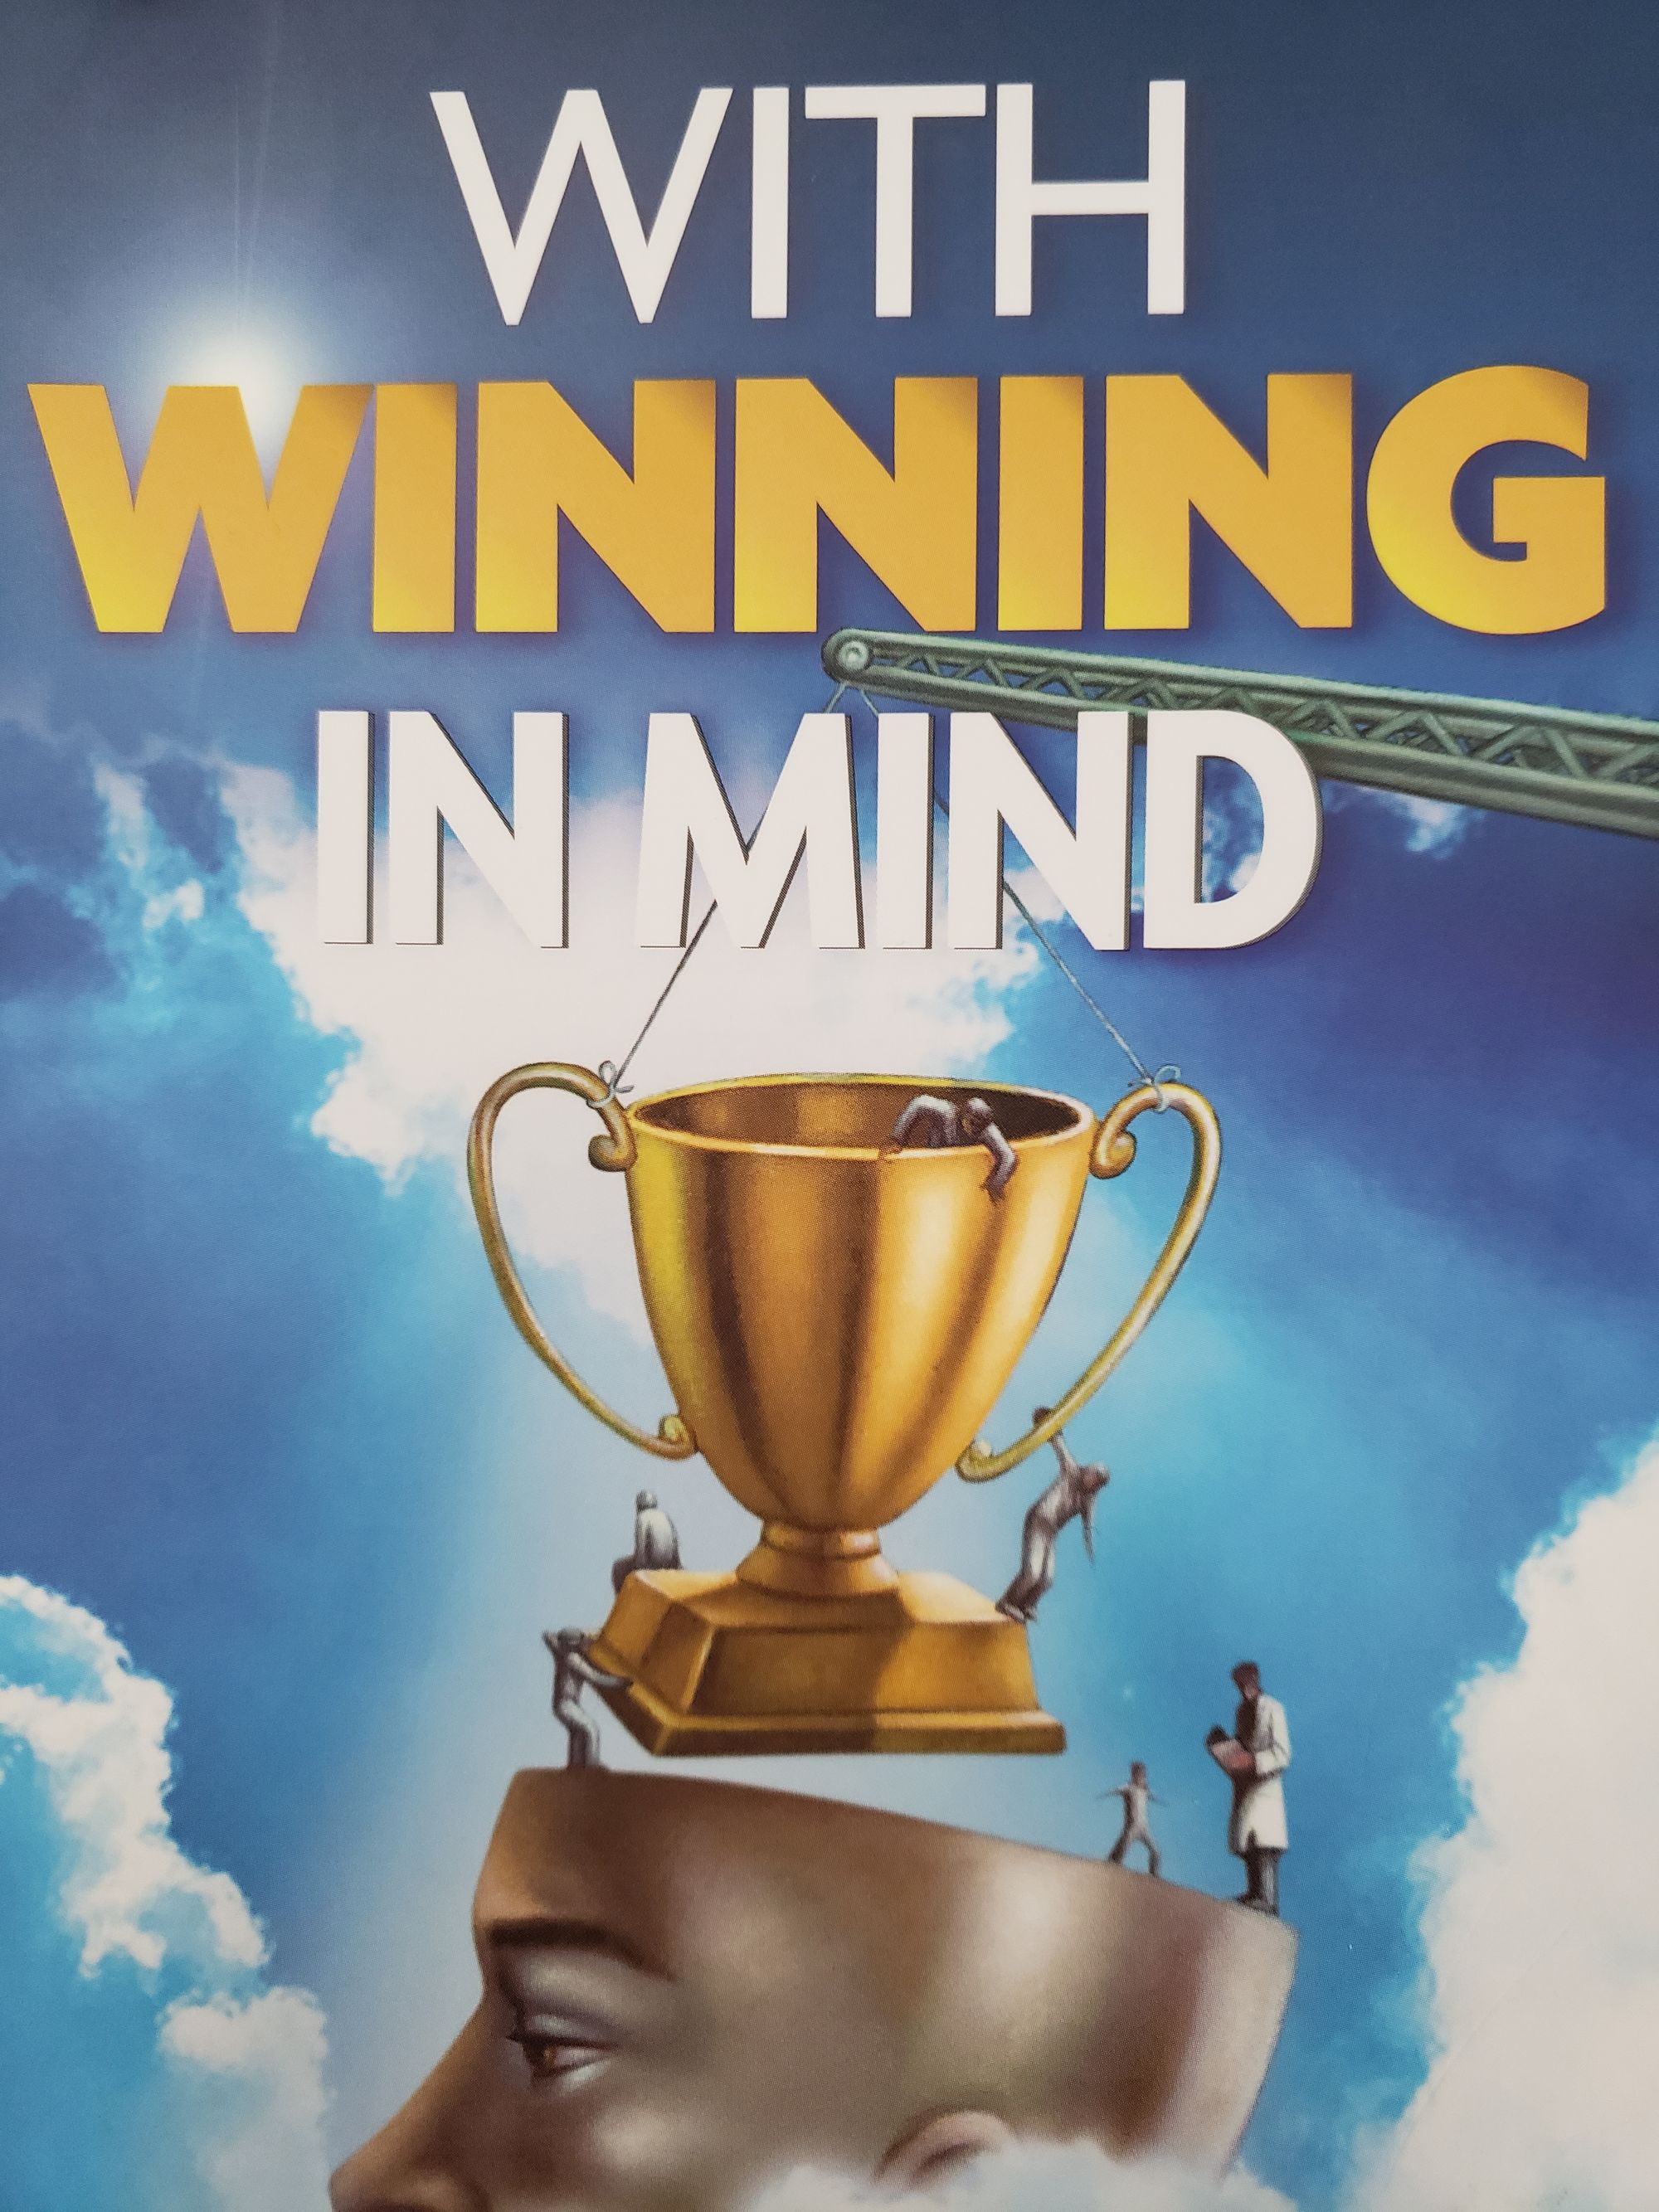 With Winning in Mind Powerpoint: Part 3